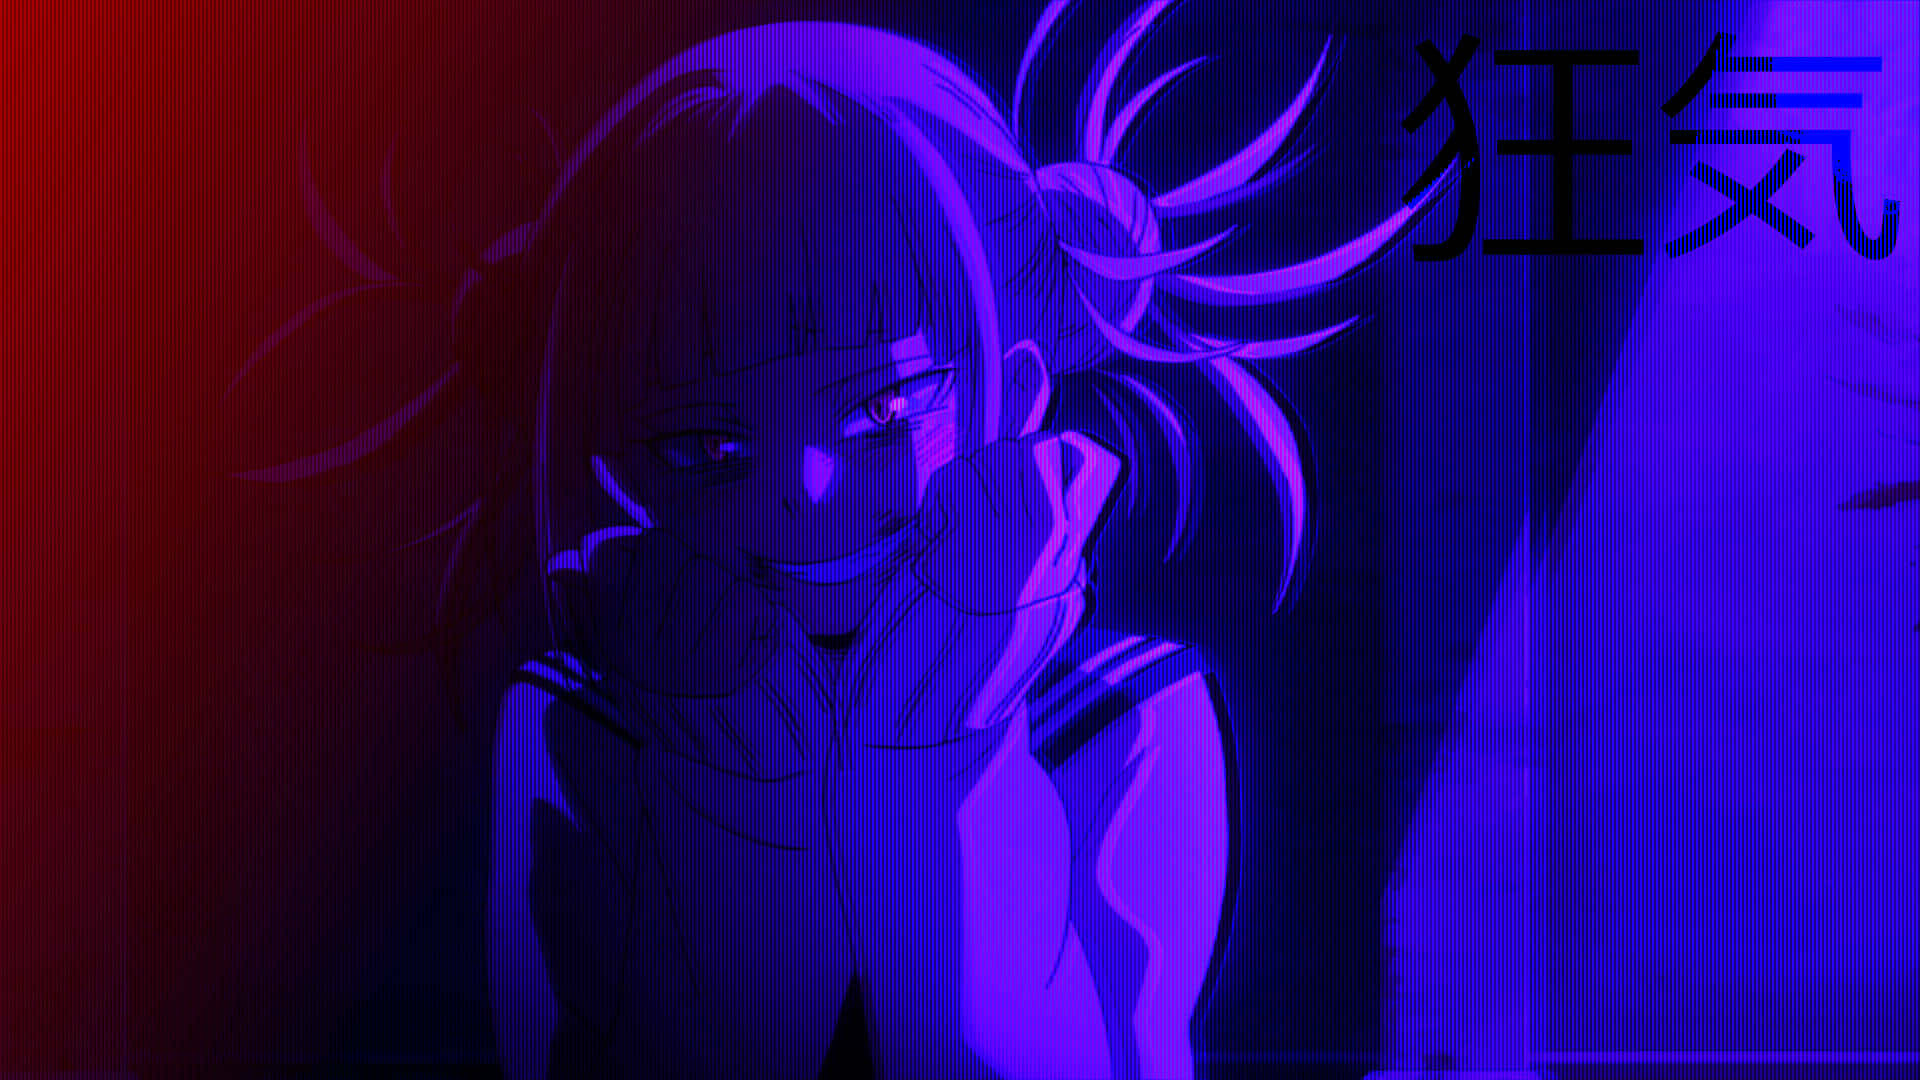 Himiko Toga Aesthetic With A Blue Light Wallpaper